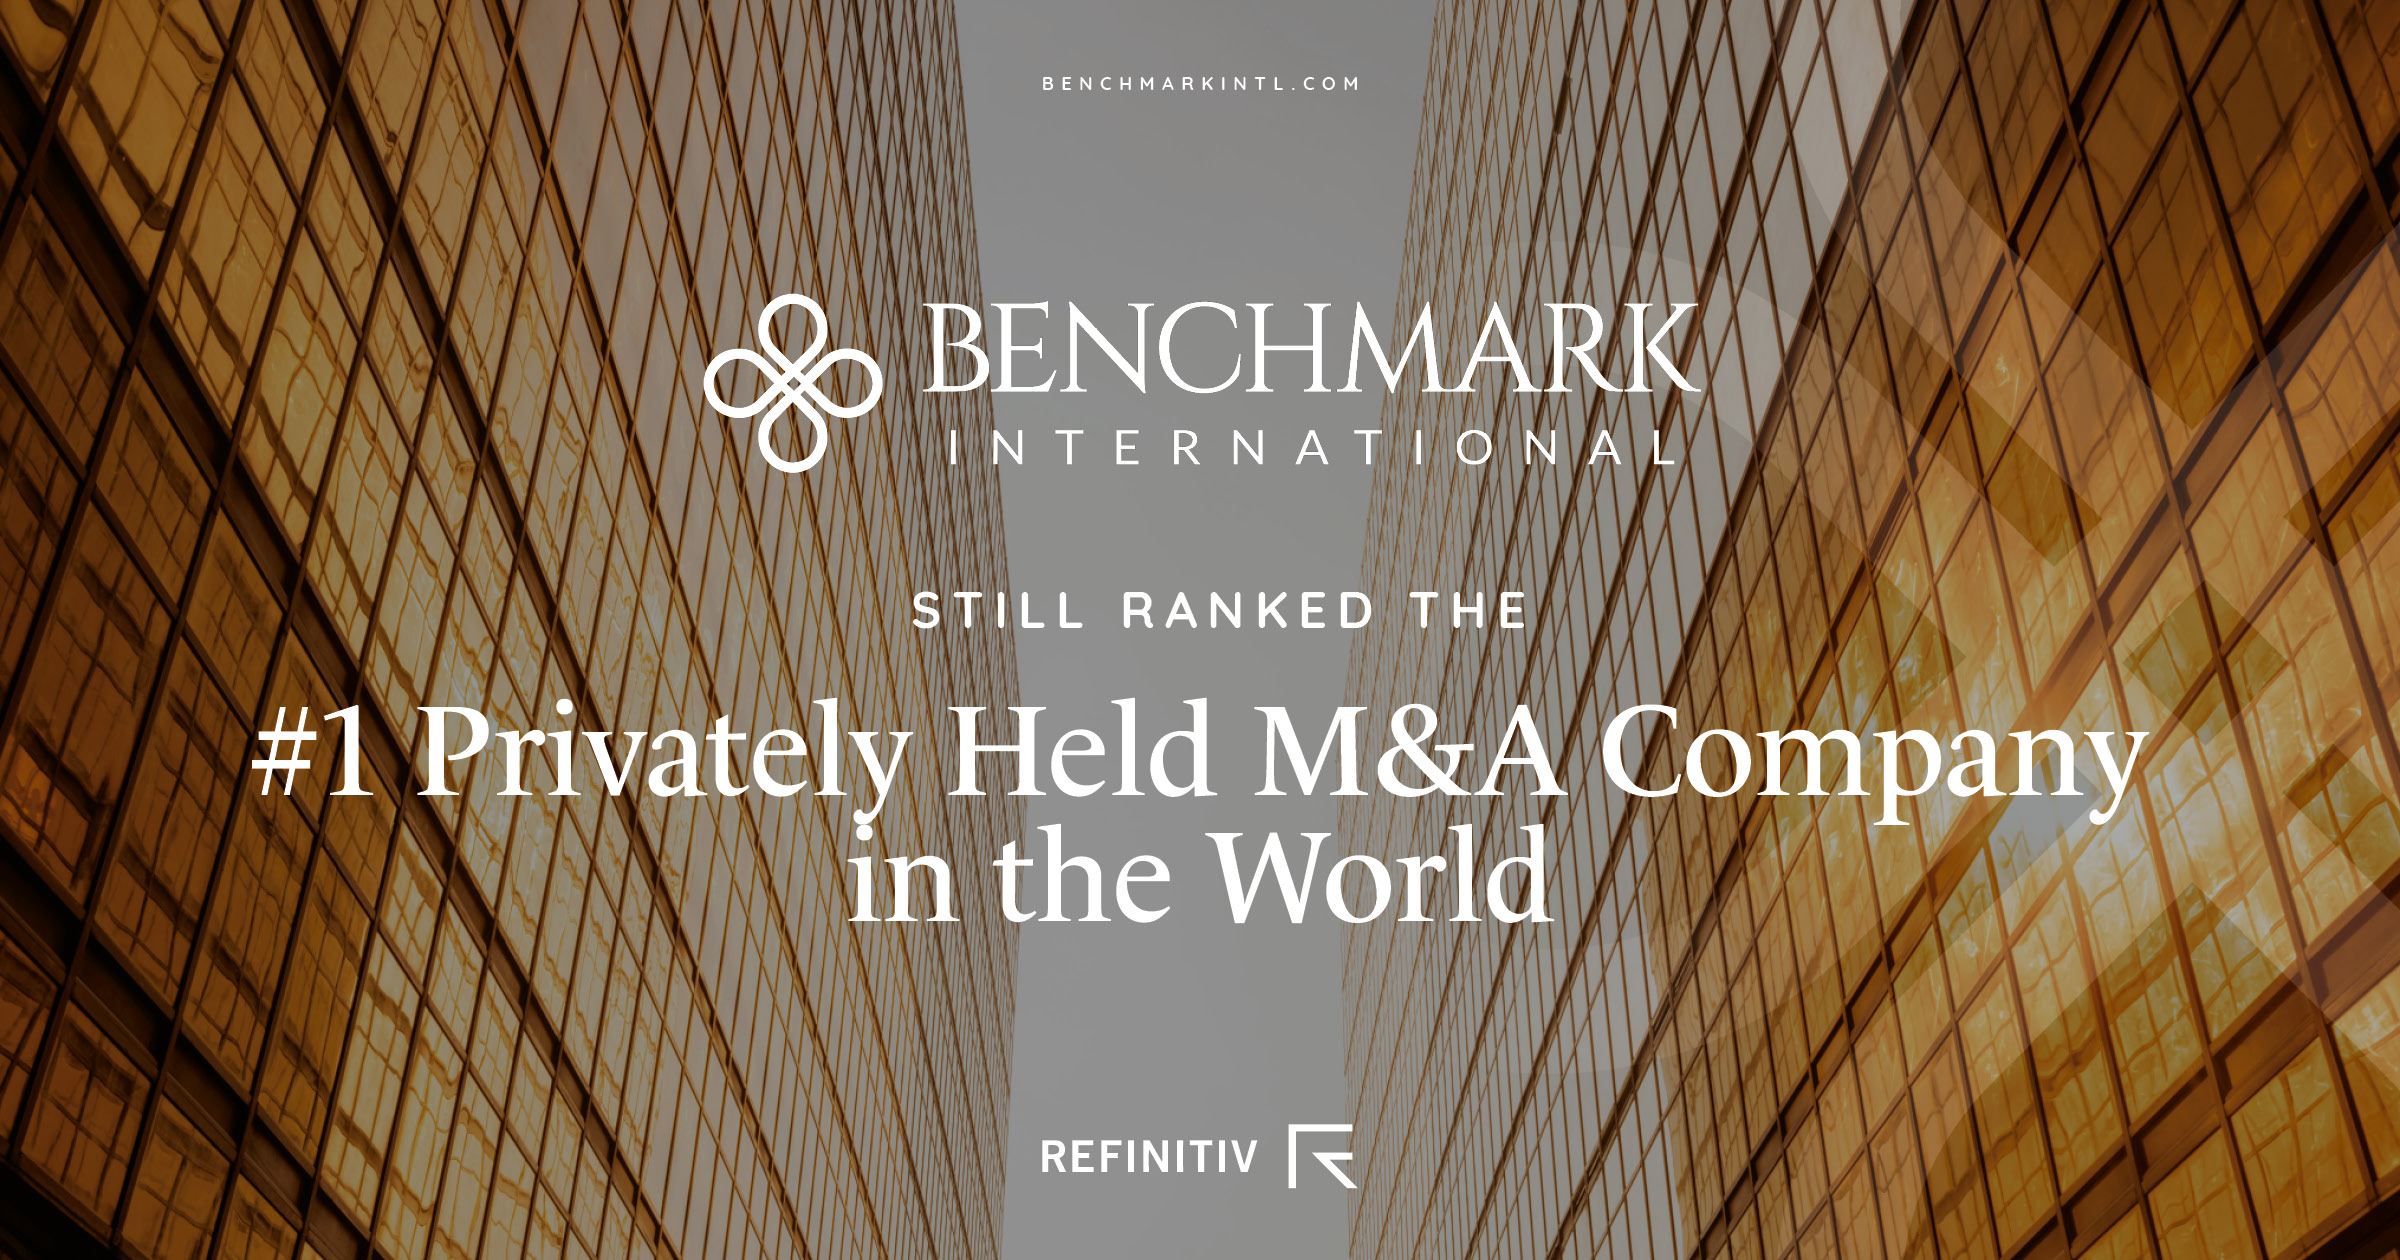 Benchmark International Still Ranked the Number One Privately Held M&A Company in the World